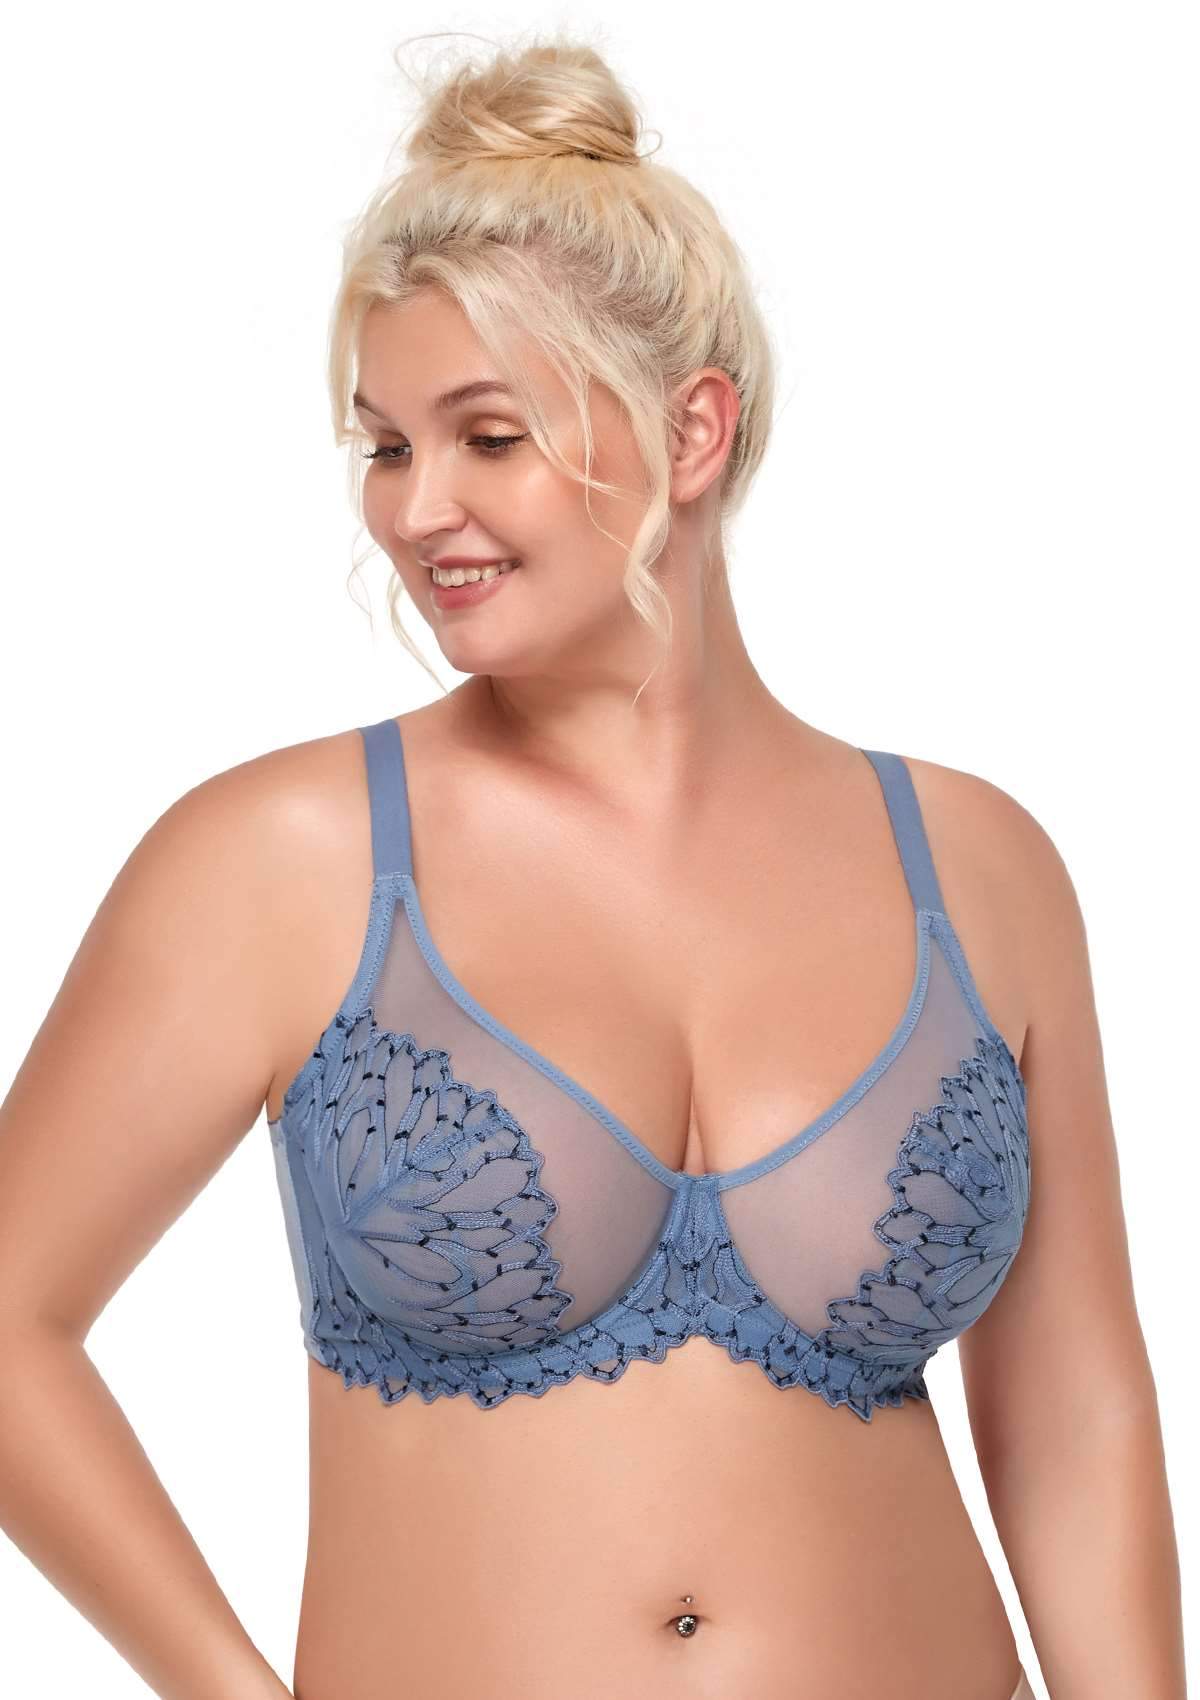 HSIA Chrysanthemum Plus Size Lace Bra: Back Support Bra For Posture - Light Pink / 34 / D